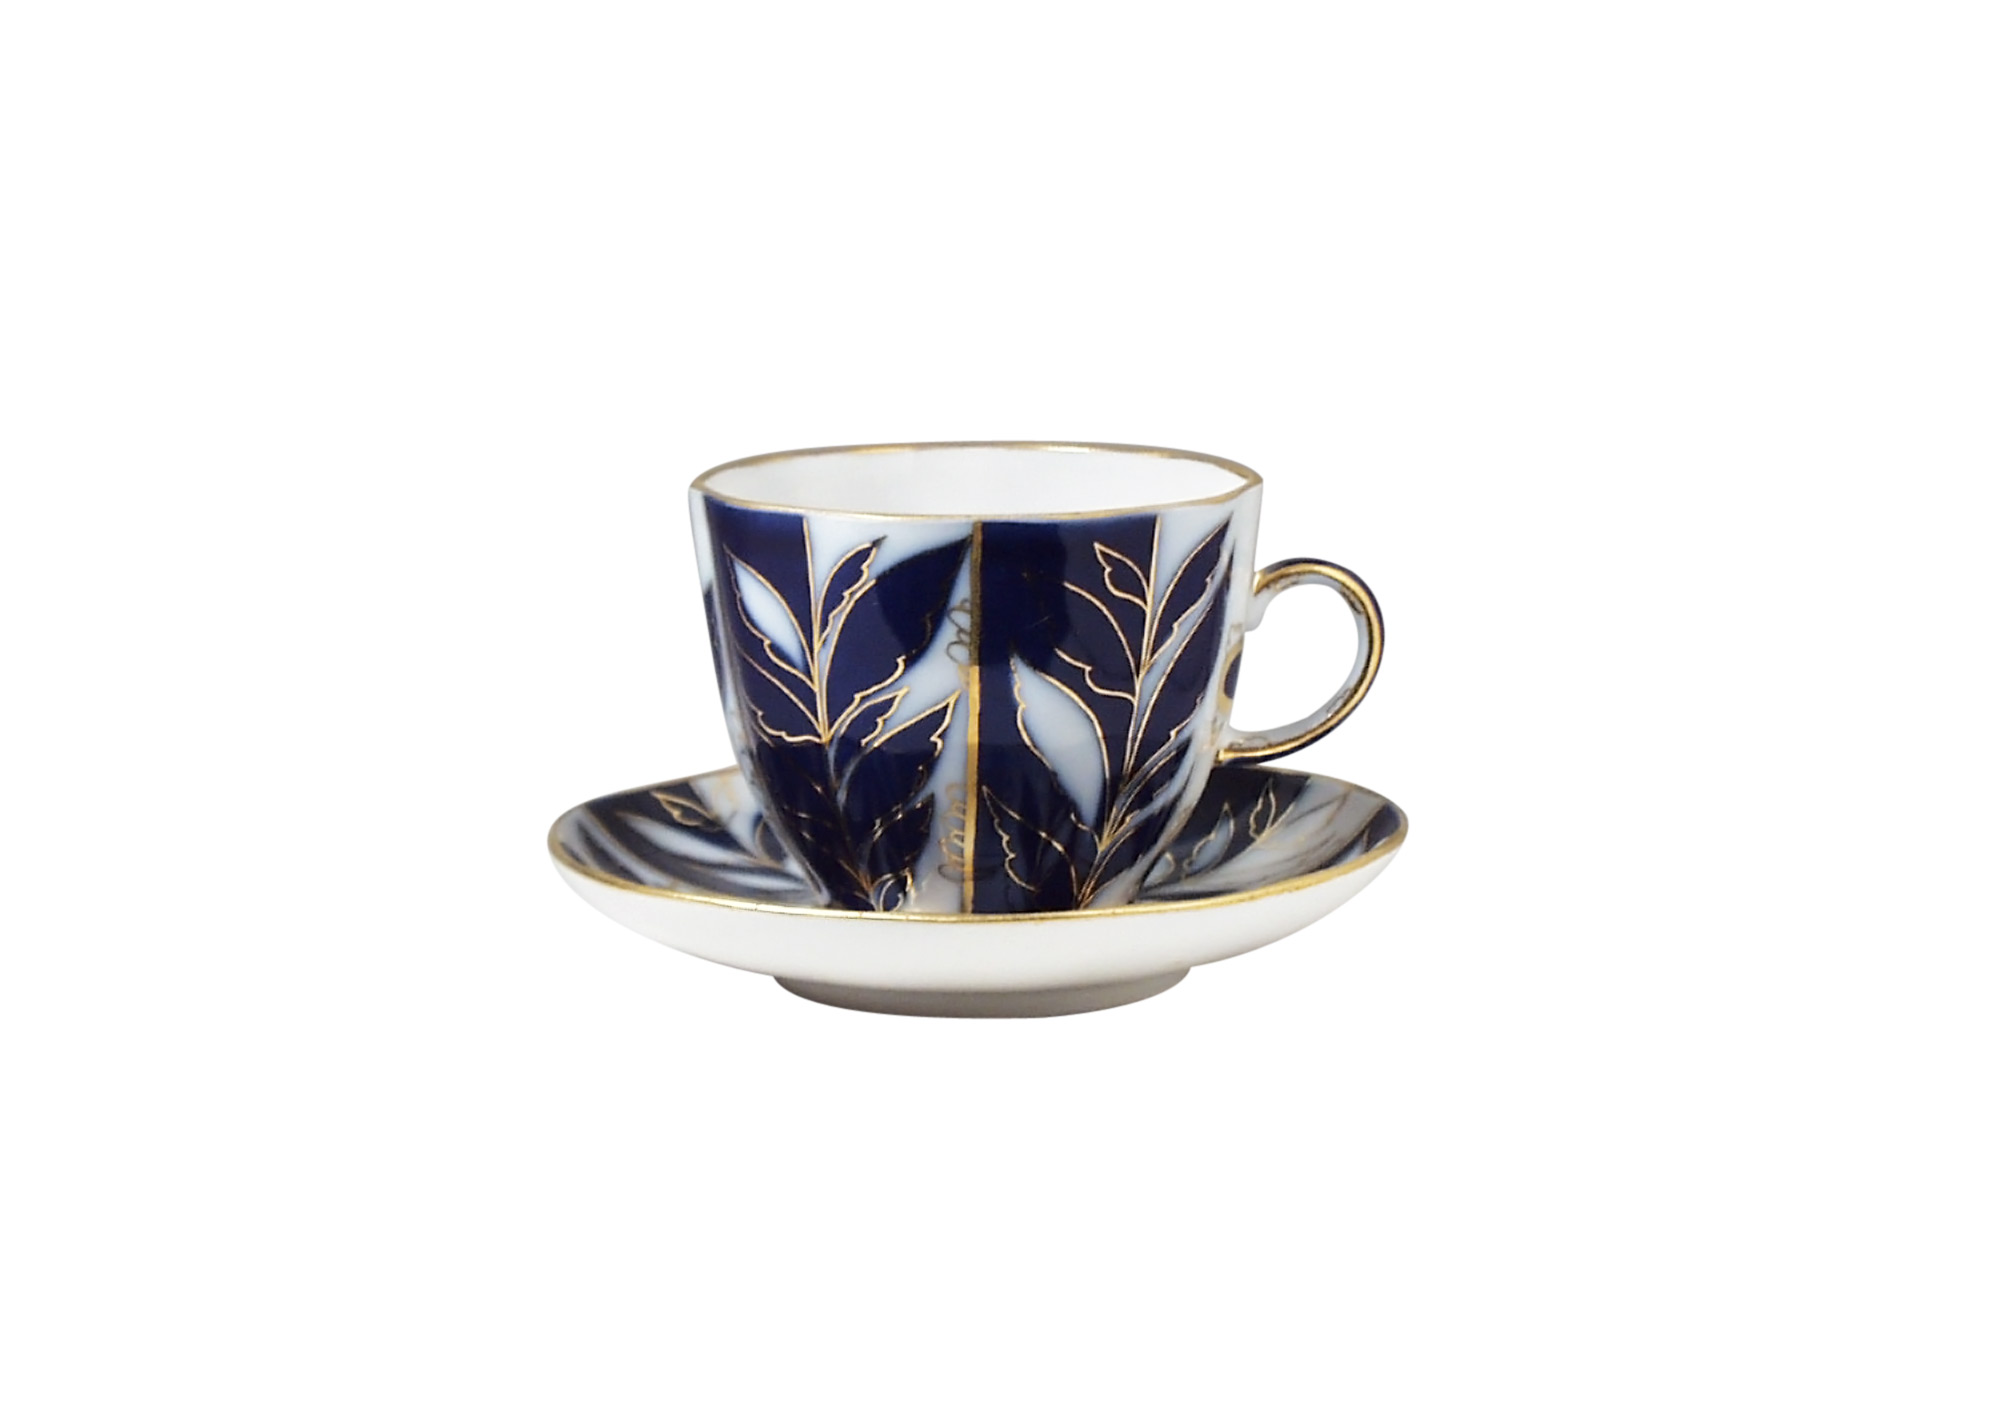 Buy Winter Evening Coffee Cup and Saucer at GoldenCockerel.com